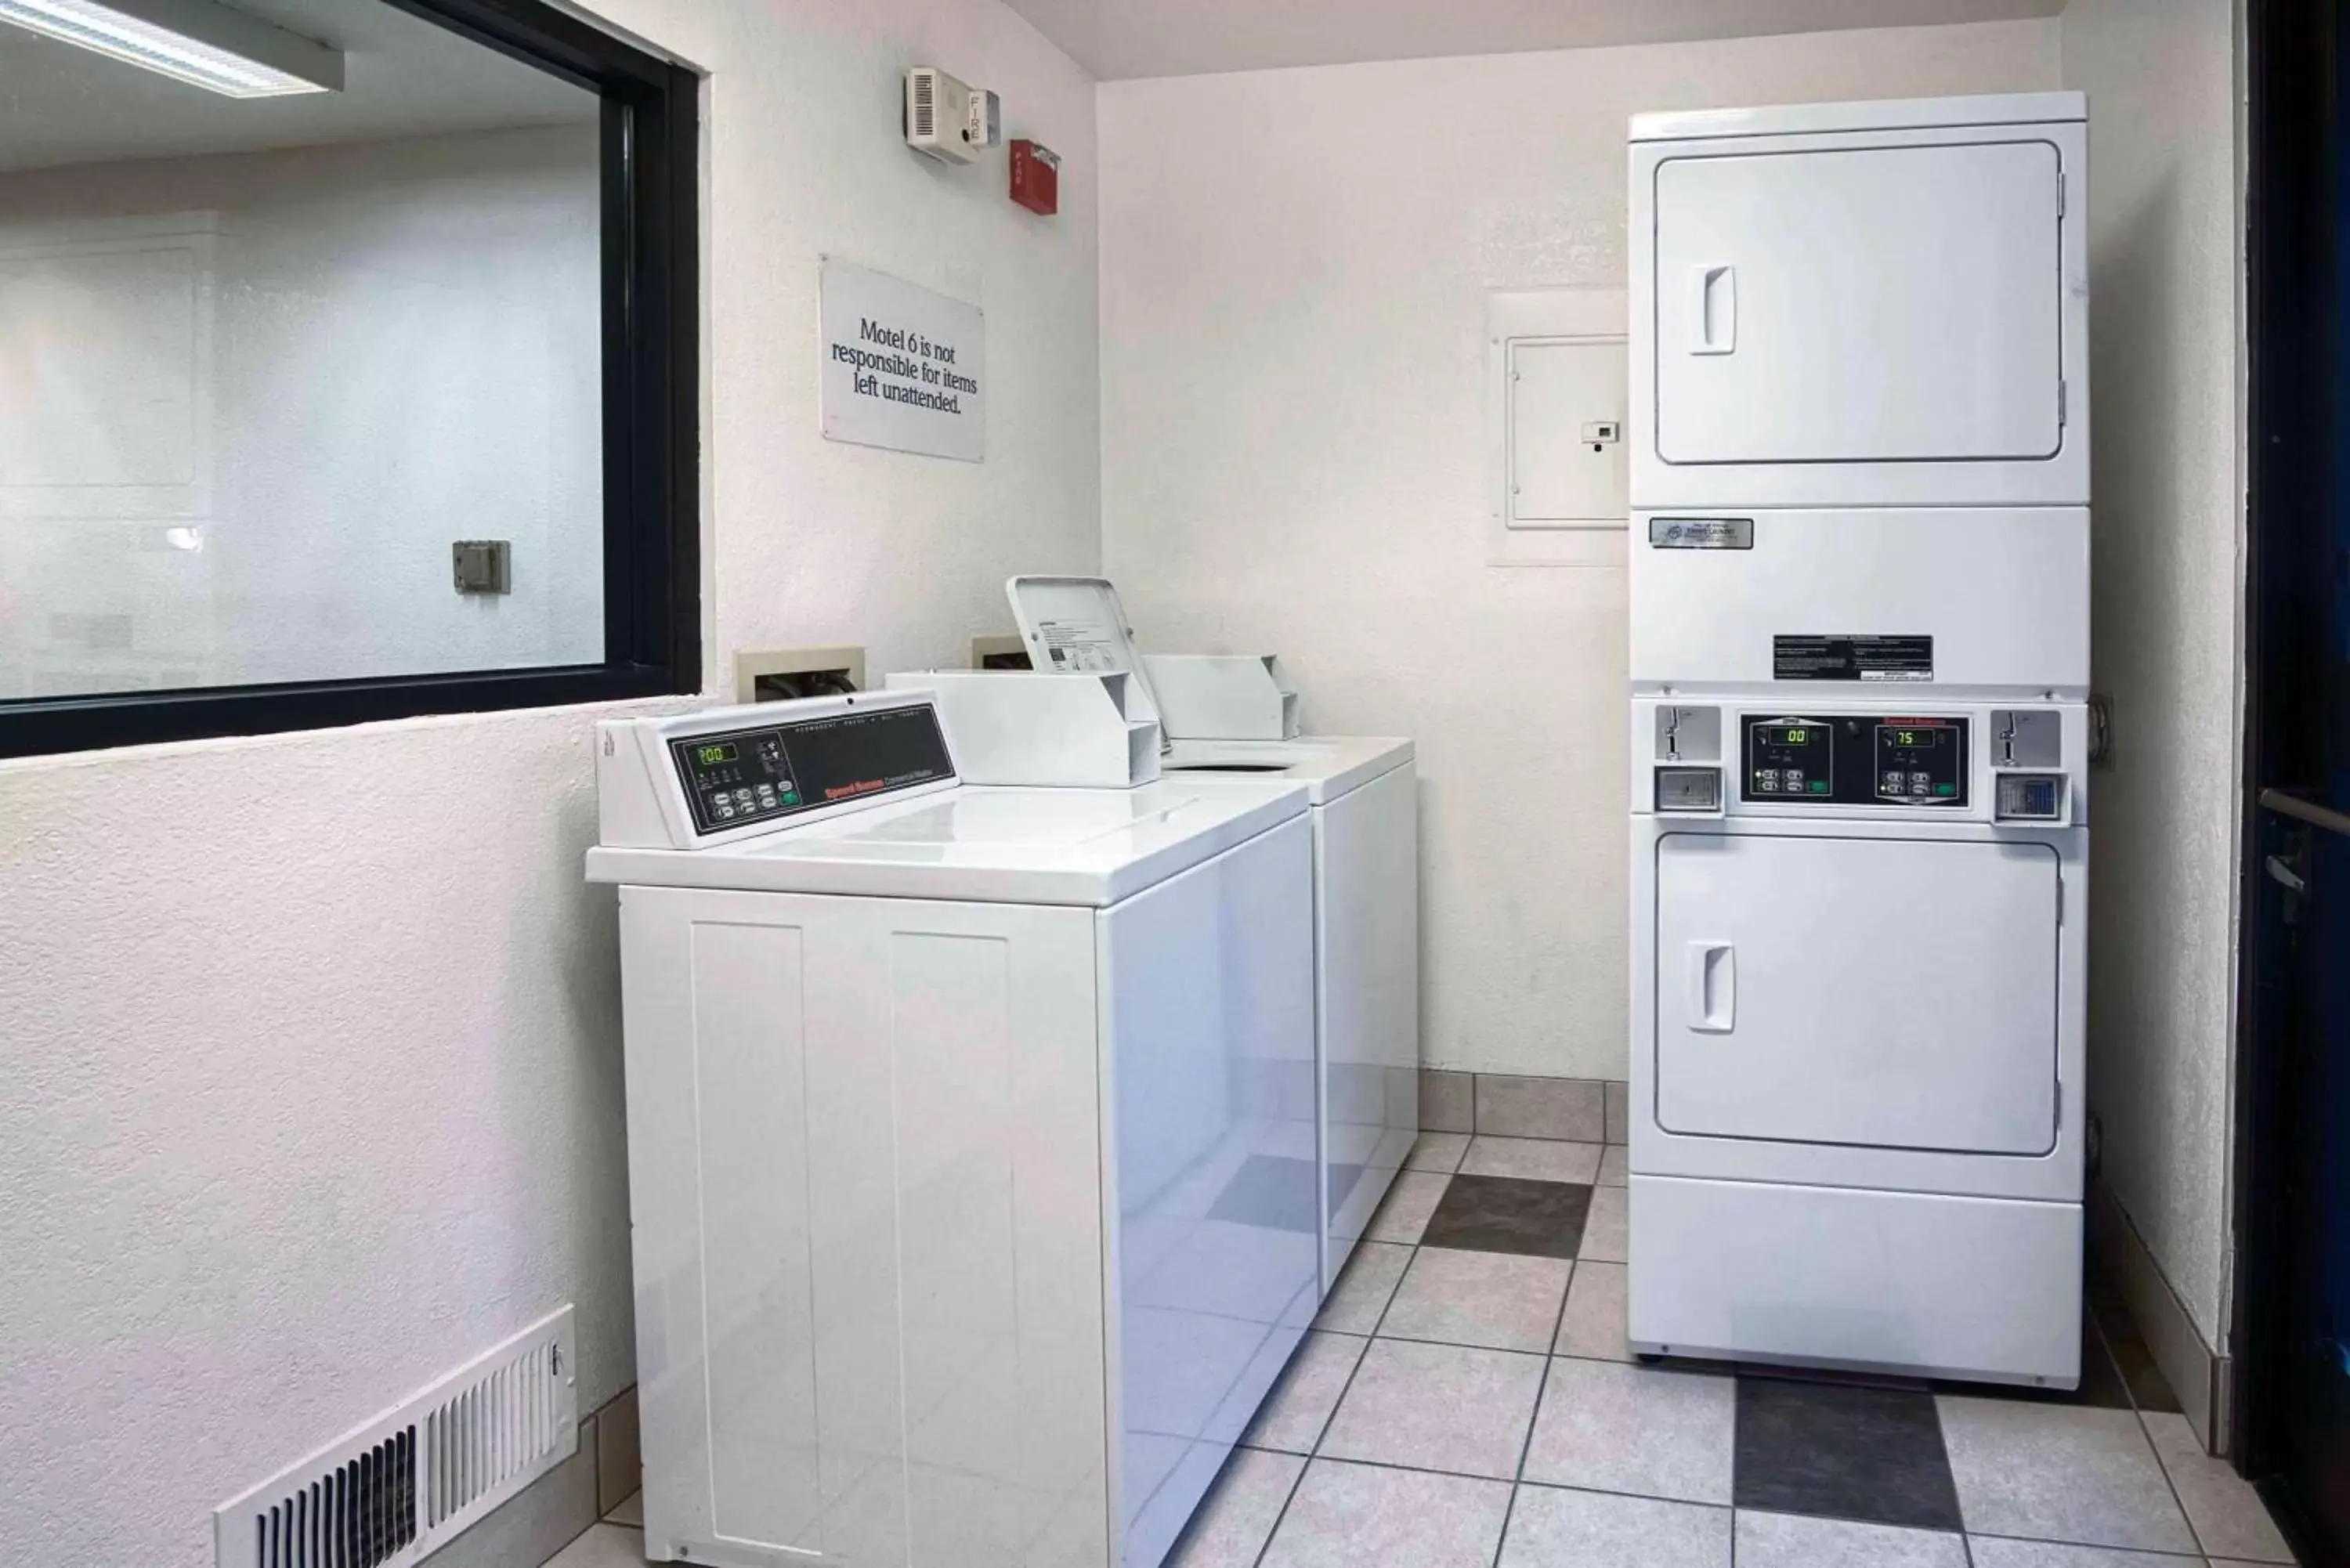 Property building, Kitchen/Kitchenette in Motel 6-Mammoth Lakes, CA